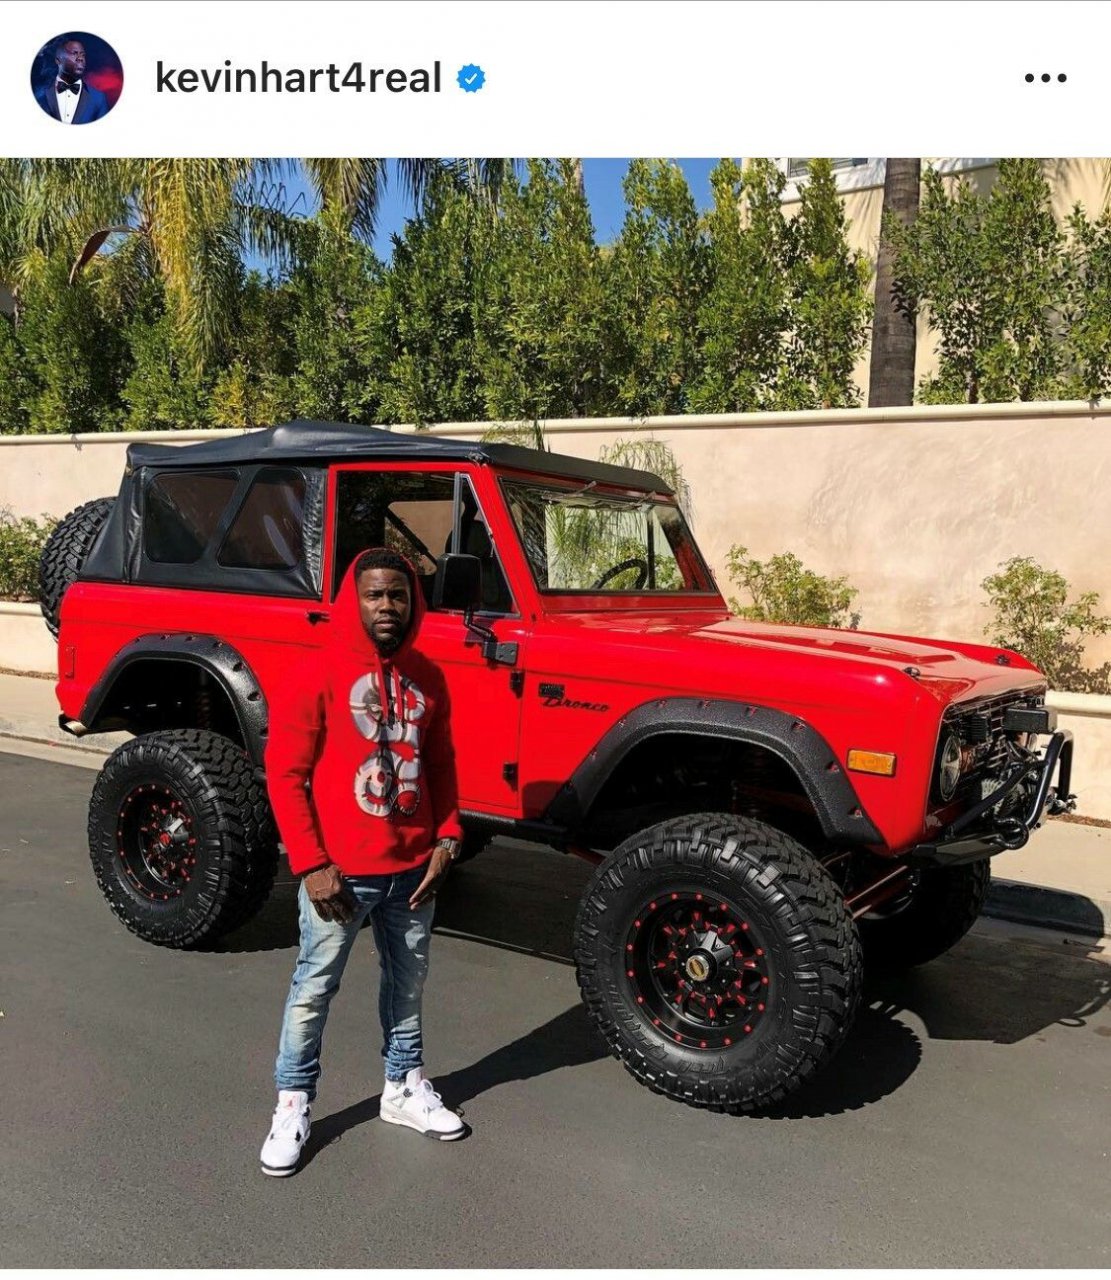 Kevin Hart to sell his custom 1977 Ford Bronco at Barrett-Jackson’s Las Vegas auction